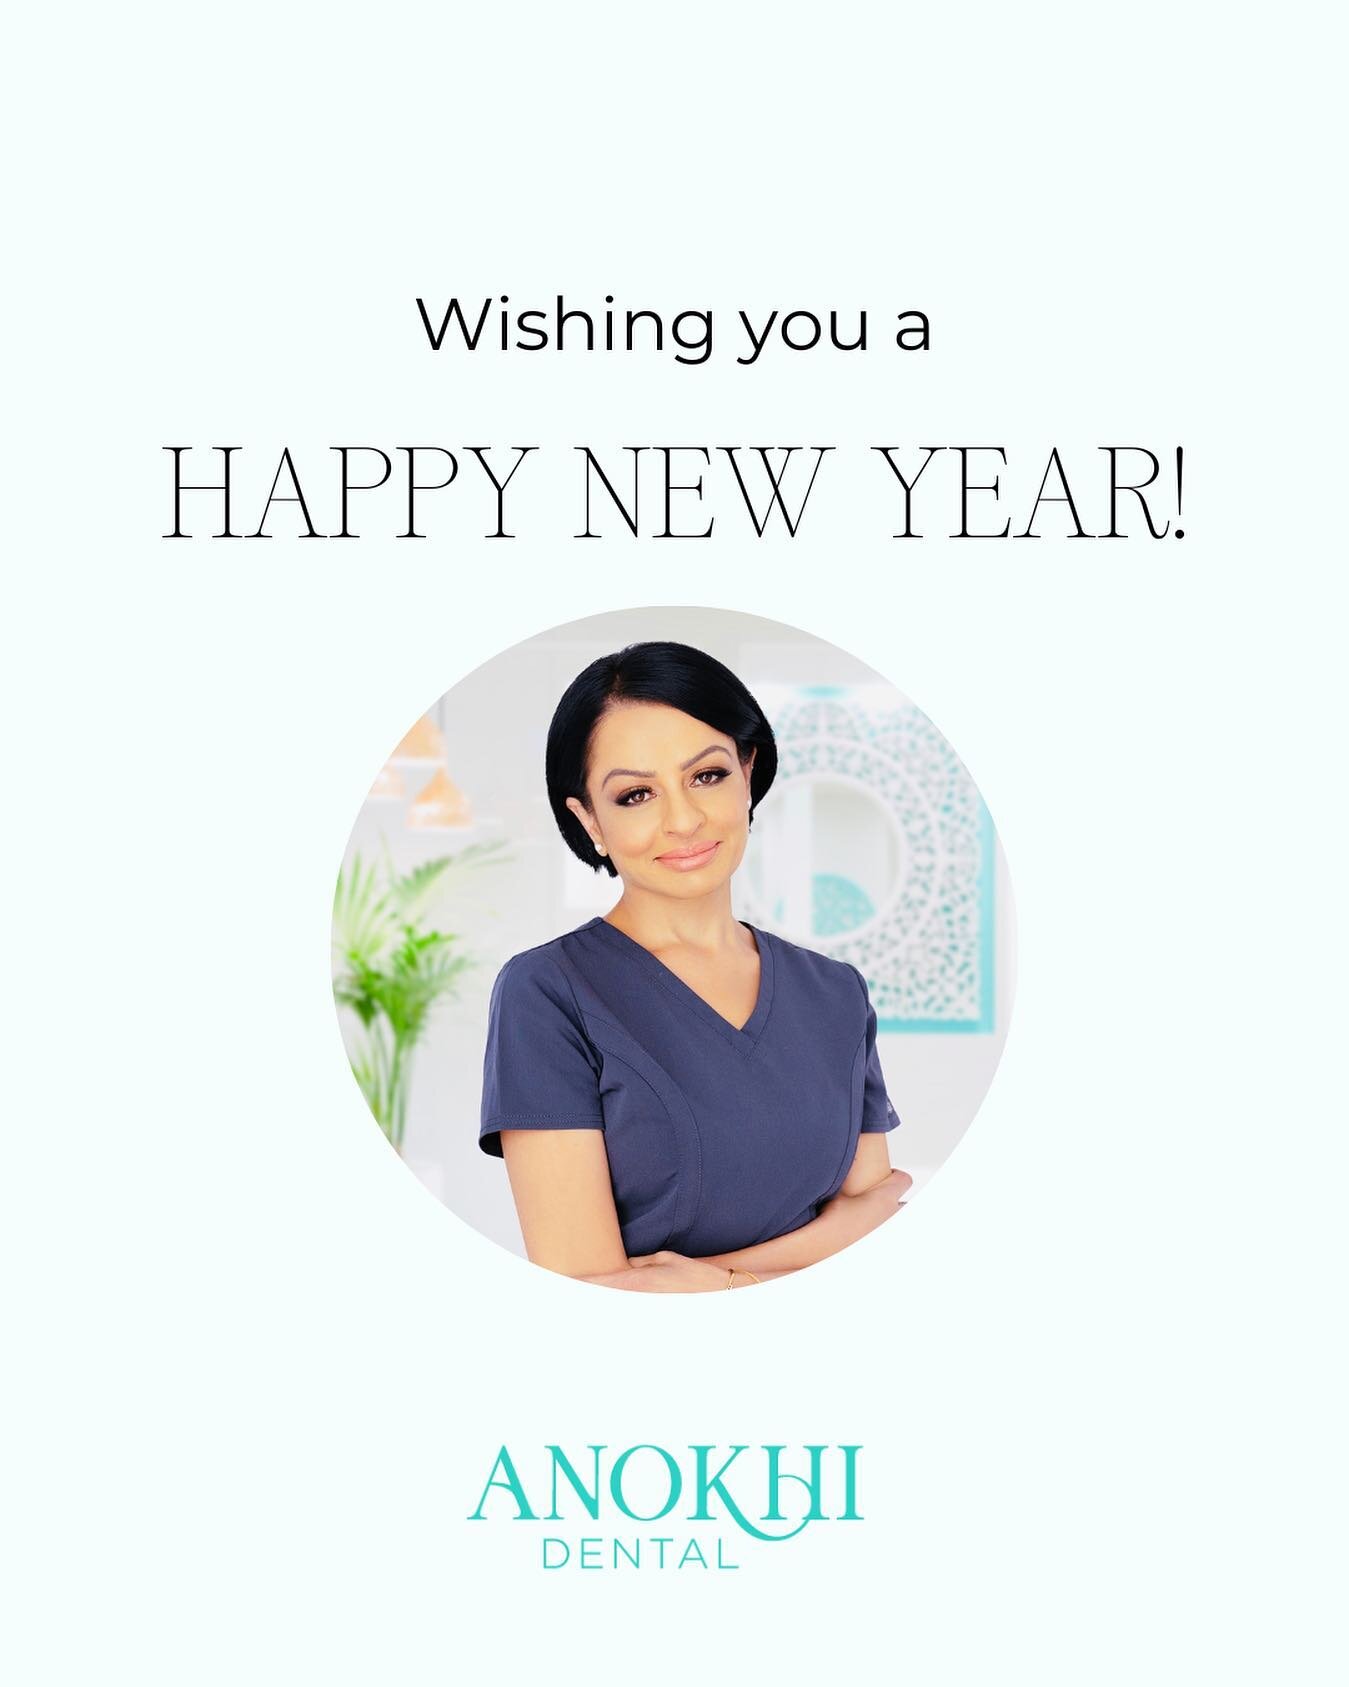 Wishing you all the best for 2023 from Dr Aushi Patel and the Anokhi Dental team!
😊
May you experience good health, joy, and an abundance of blessings! 
✨🌱🪷🌱✨

#anokhidental #holisticdentist #sydneydentist #fluoridefree #wellness #toothbrush #ora